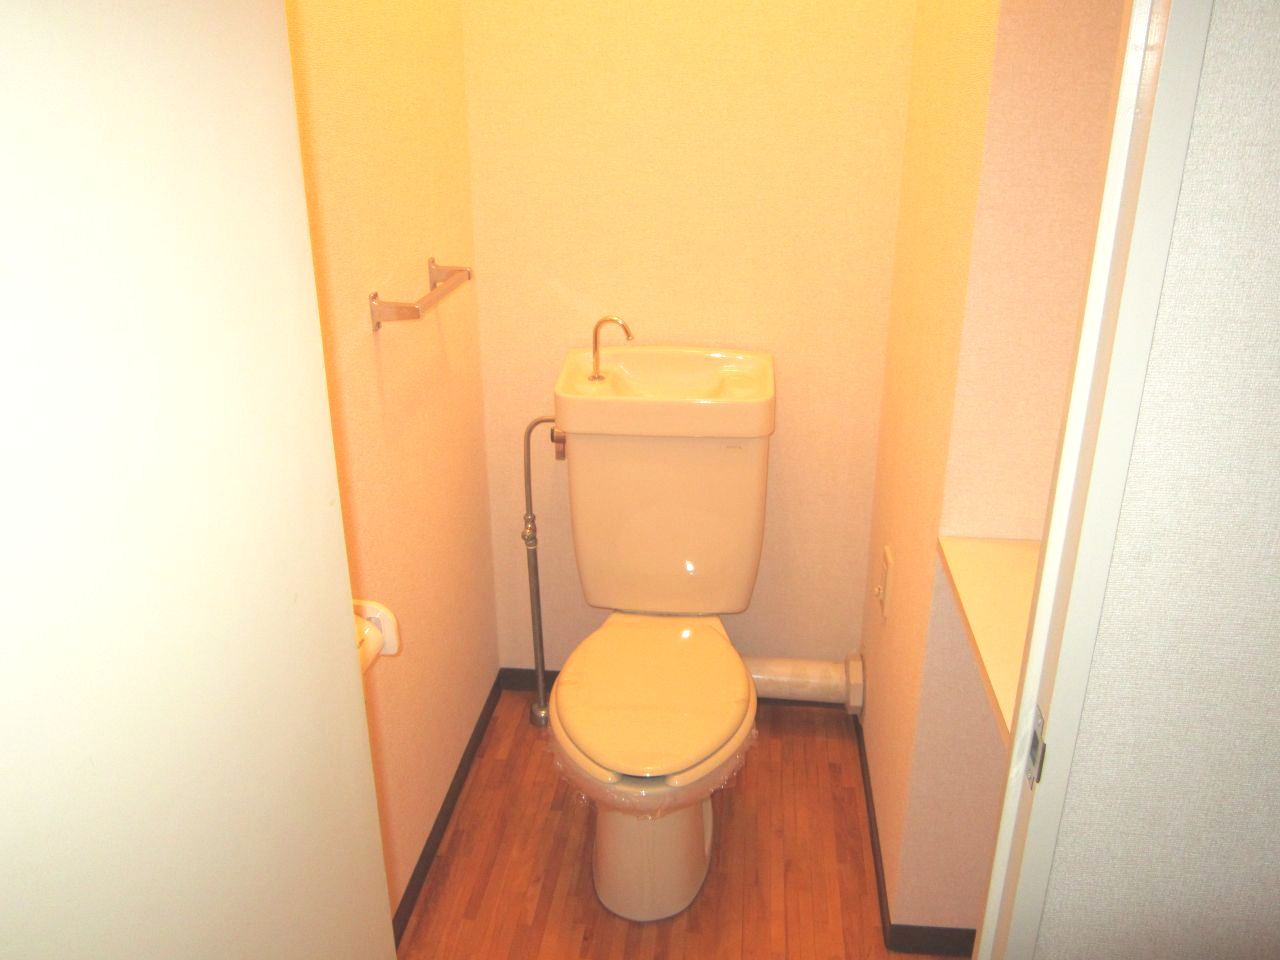 Toilet. There is also a small shelf.